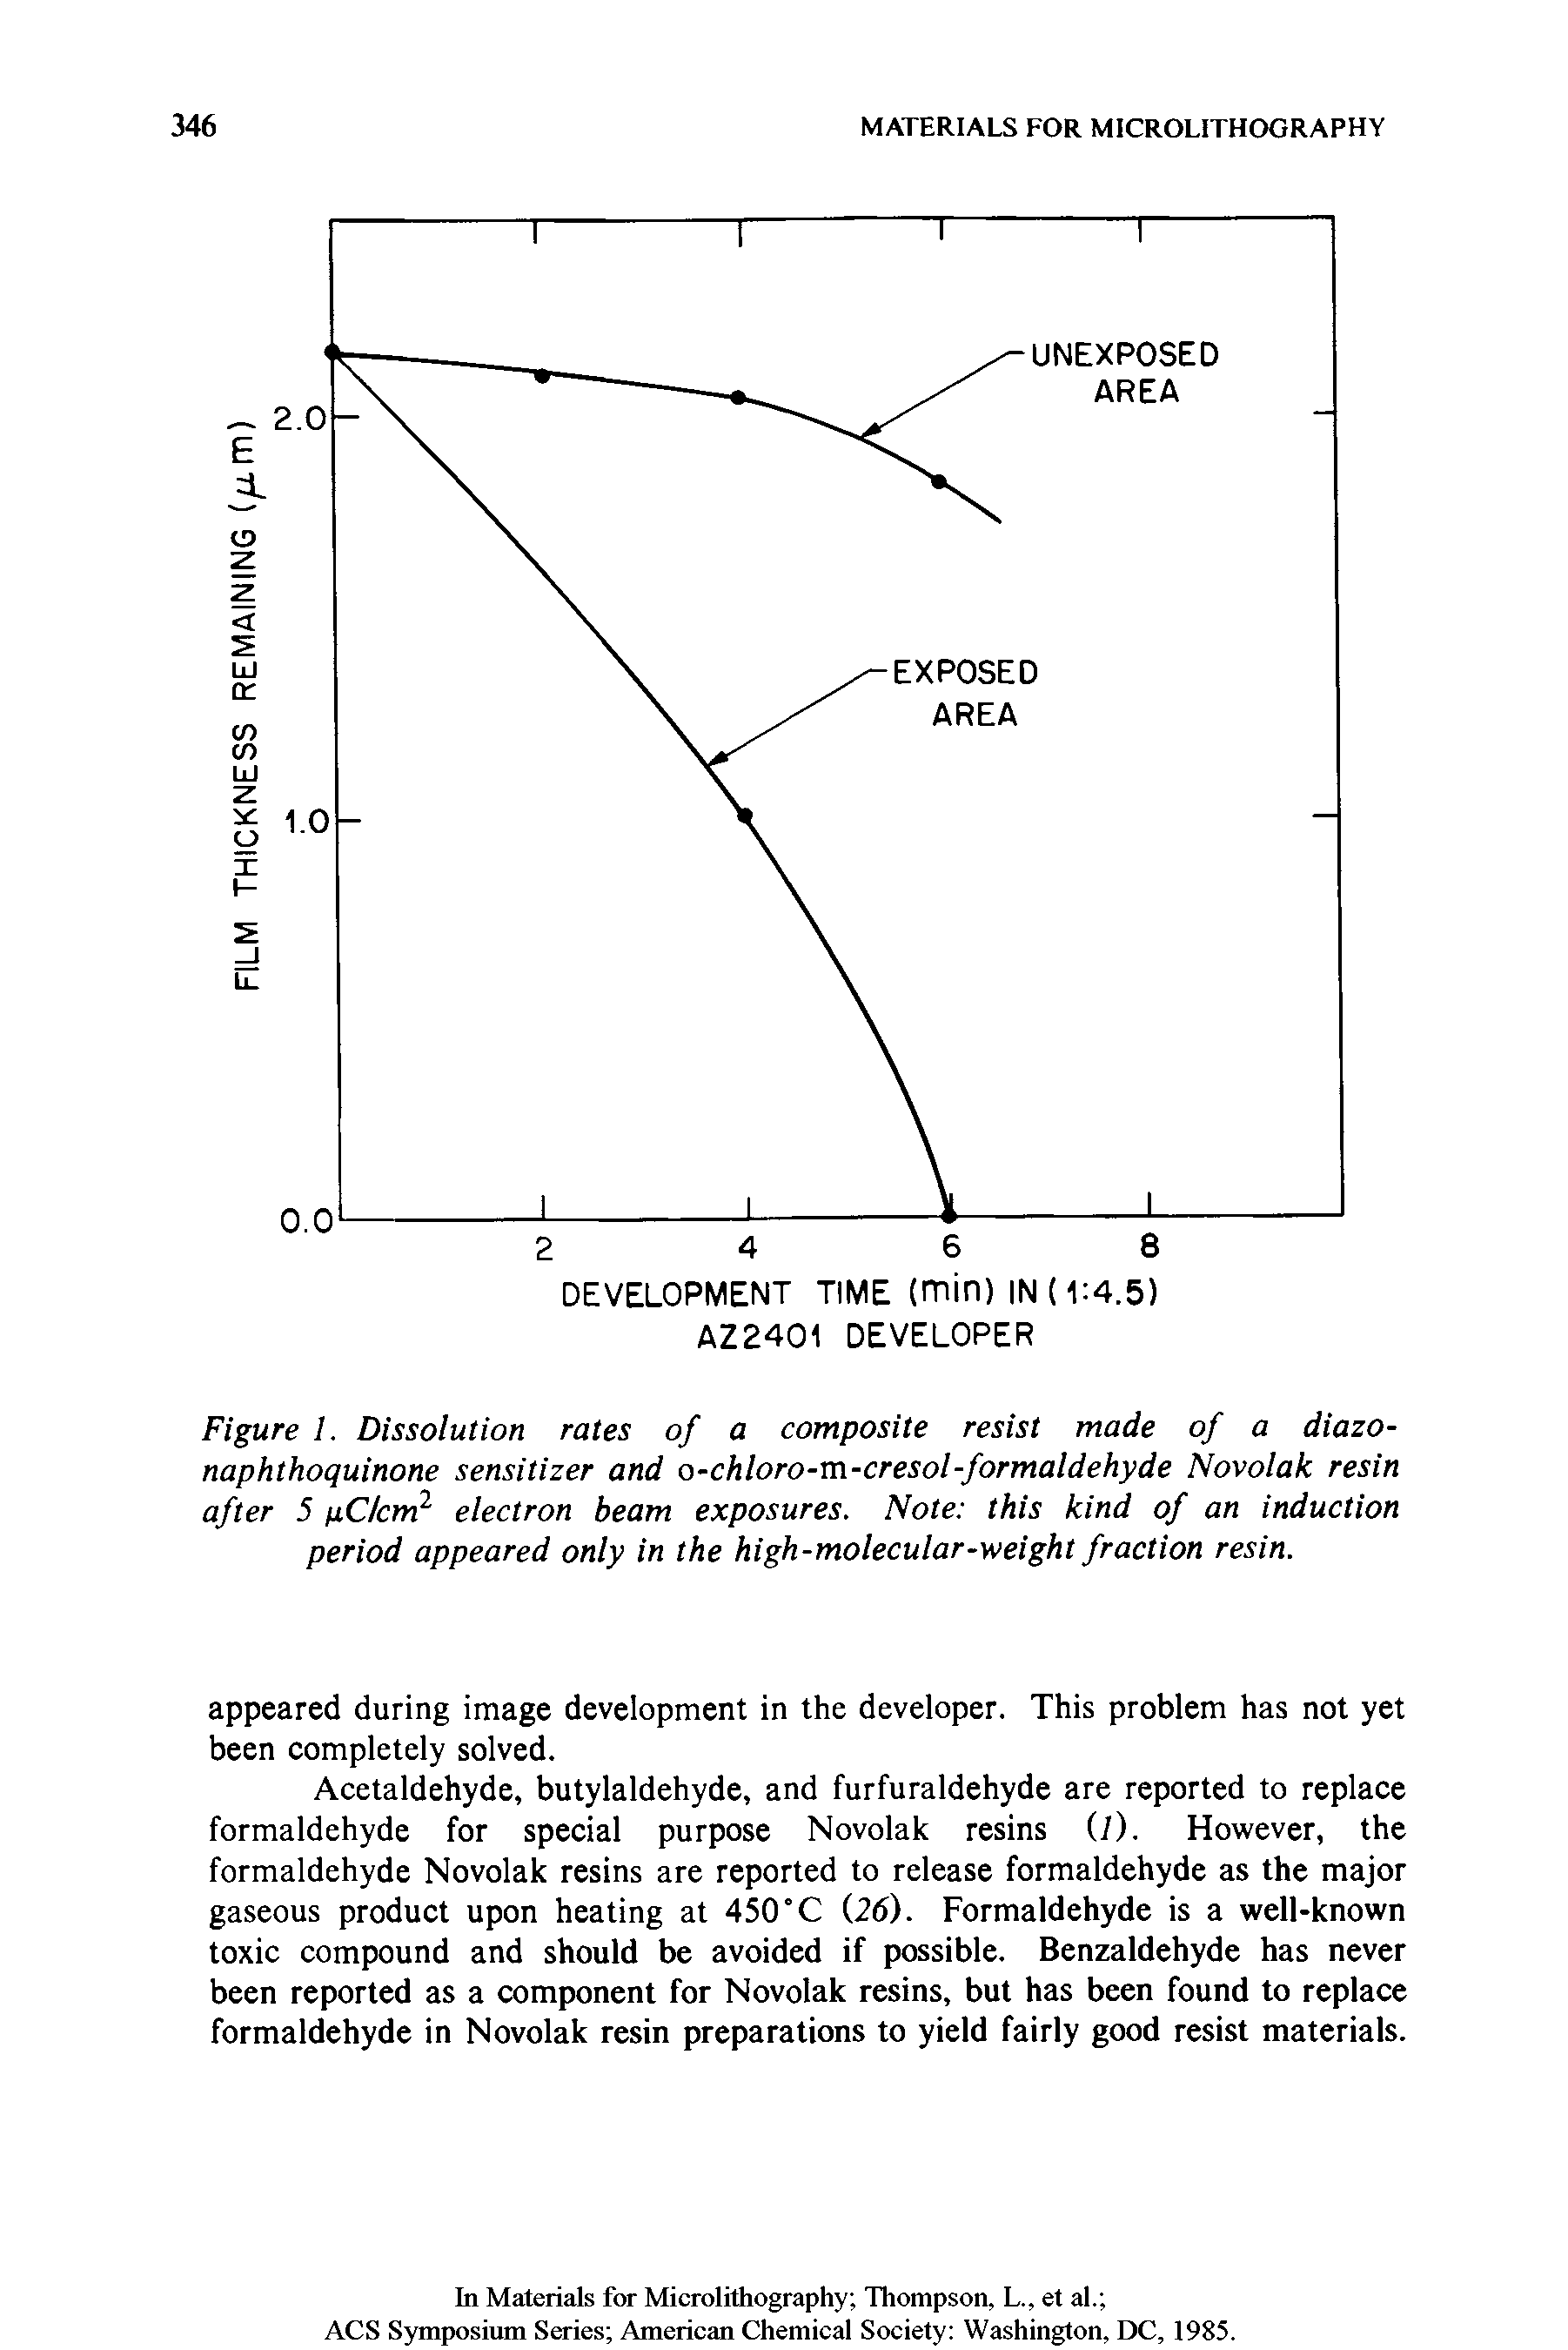 Figure 1. Dissolution rates of a composite resist made of a diazonaphthoquinone sensitizer and o-chloro-m-cresol-formaldehyde Novolak resin after 5 /cm2 electron beam exposures. Note this kind of an induction period appeared only in the high-molecular-weight fraction resin.